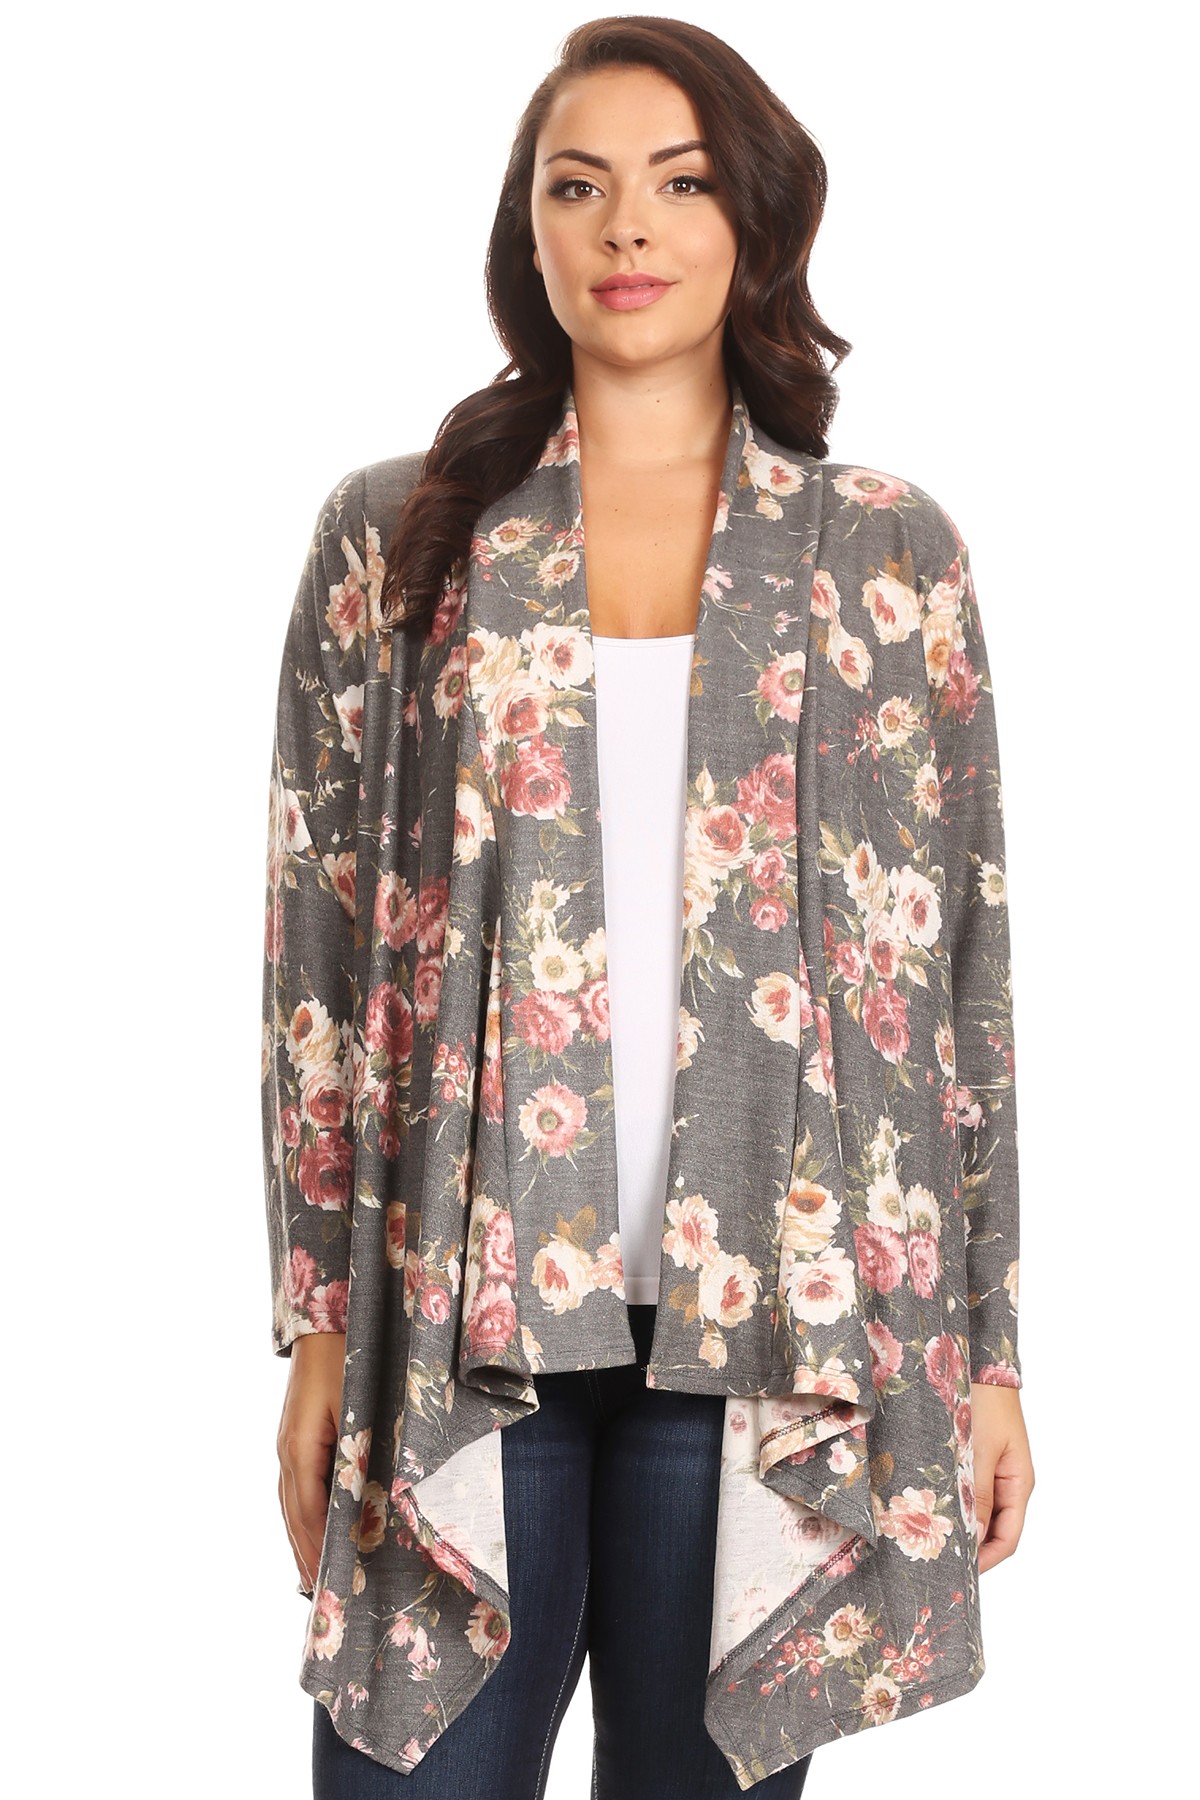 SHAWL OPEN CARDIGAN IN GRAY FLORAL